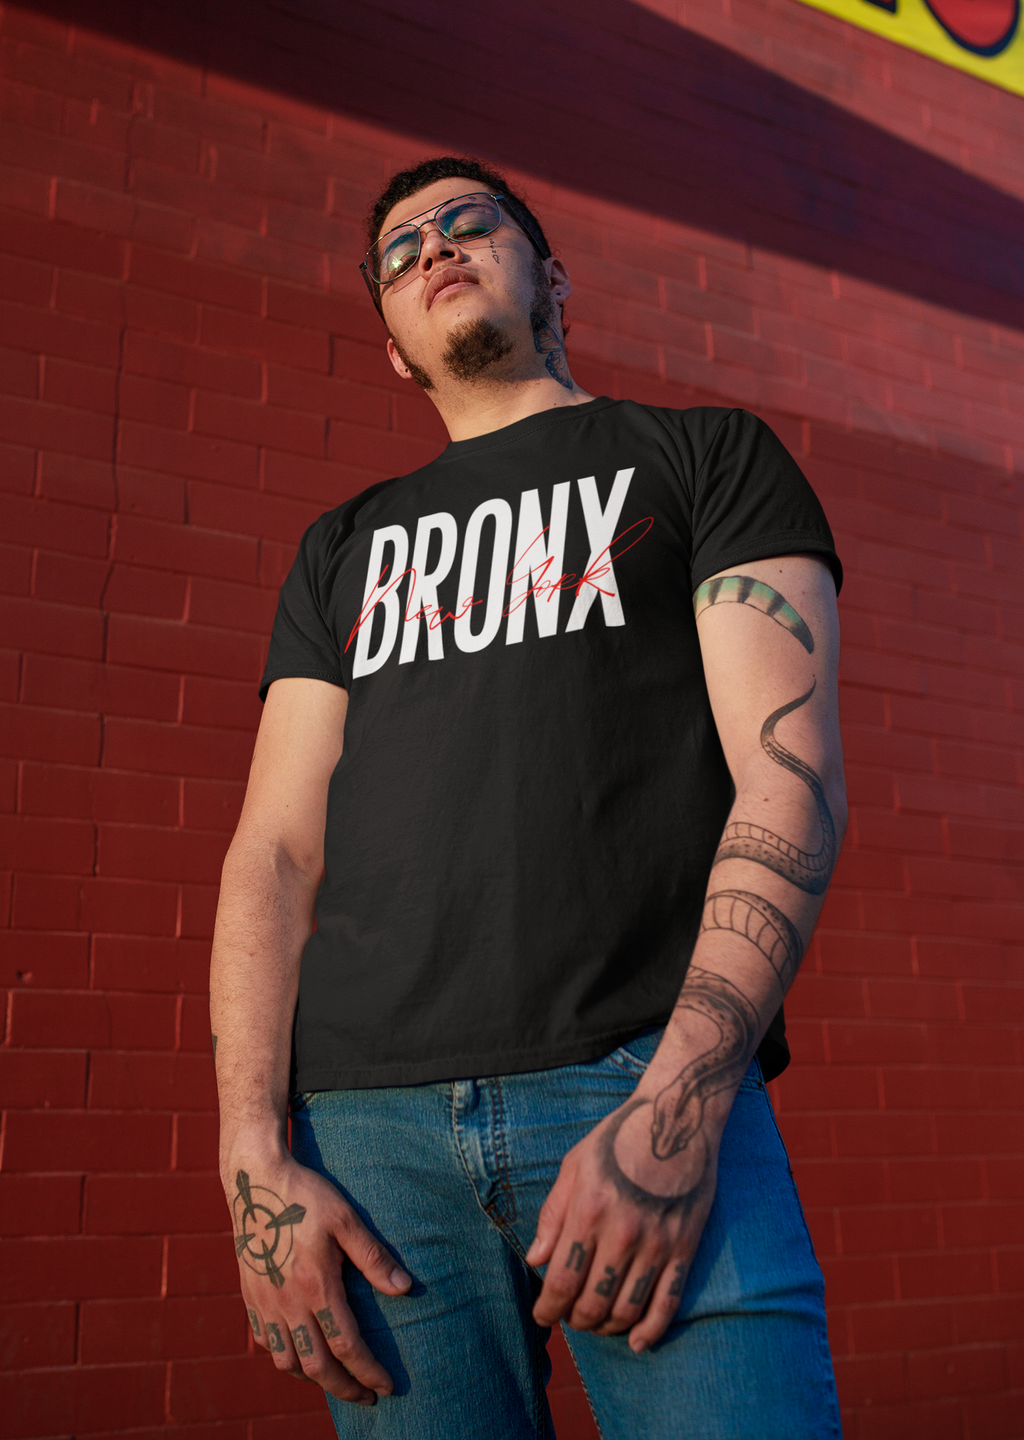 Rep Your City BX!